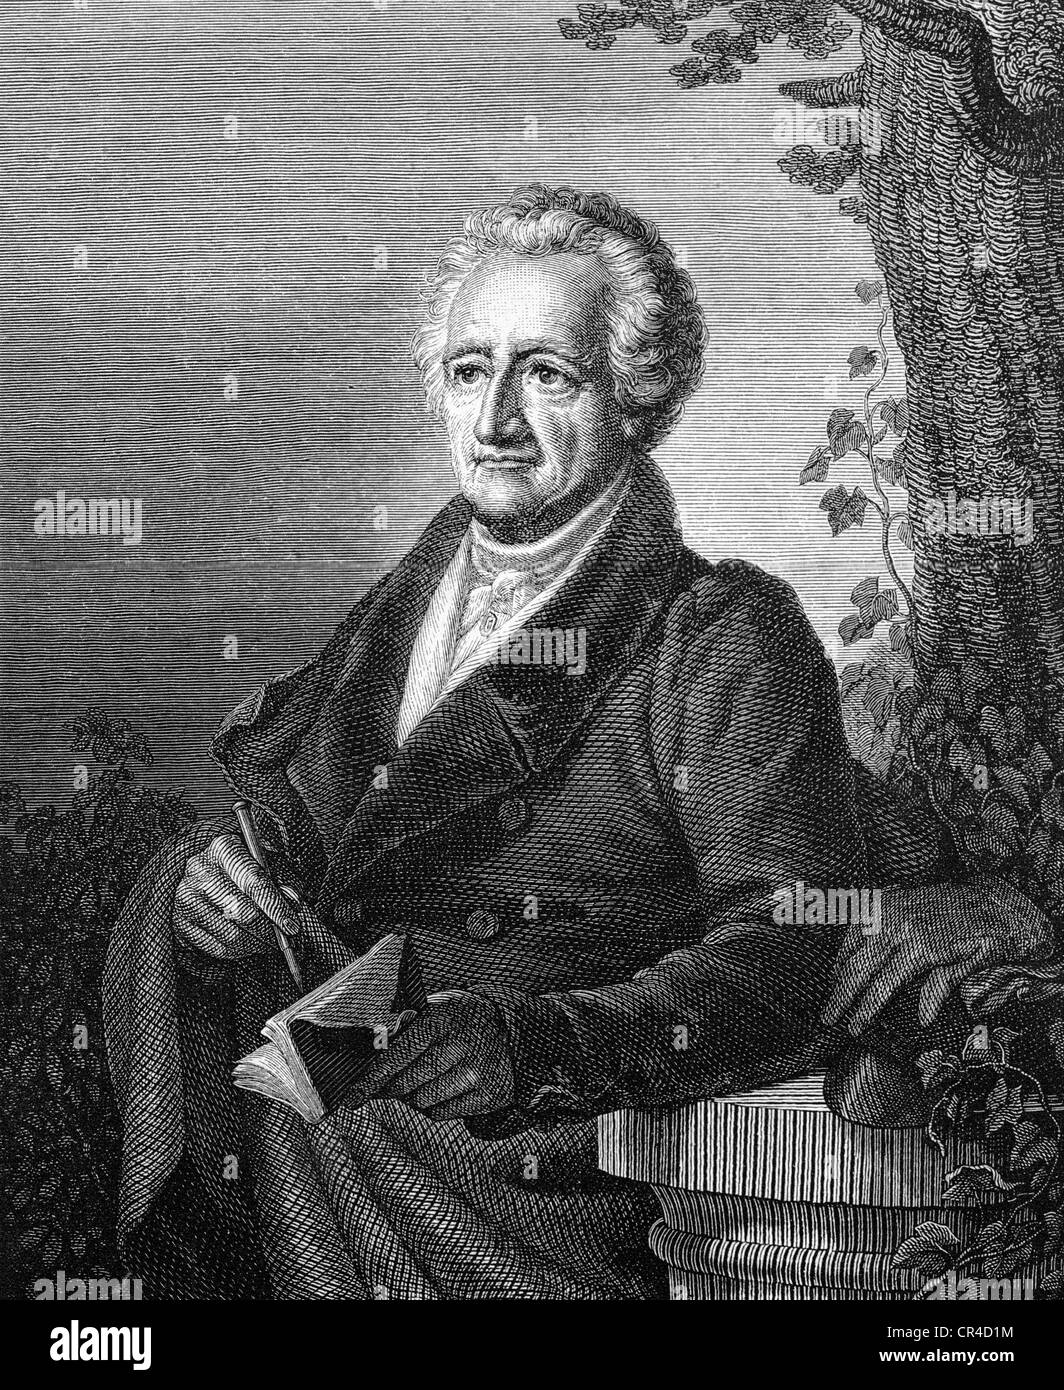 Johann Wolfgang von Goethe (1749-1832), poet, drawing and engrving by C.A. Schwerdgeburth 1832 Stock Photo